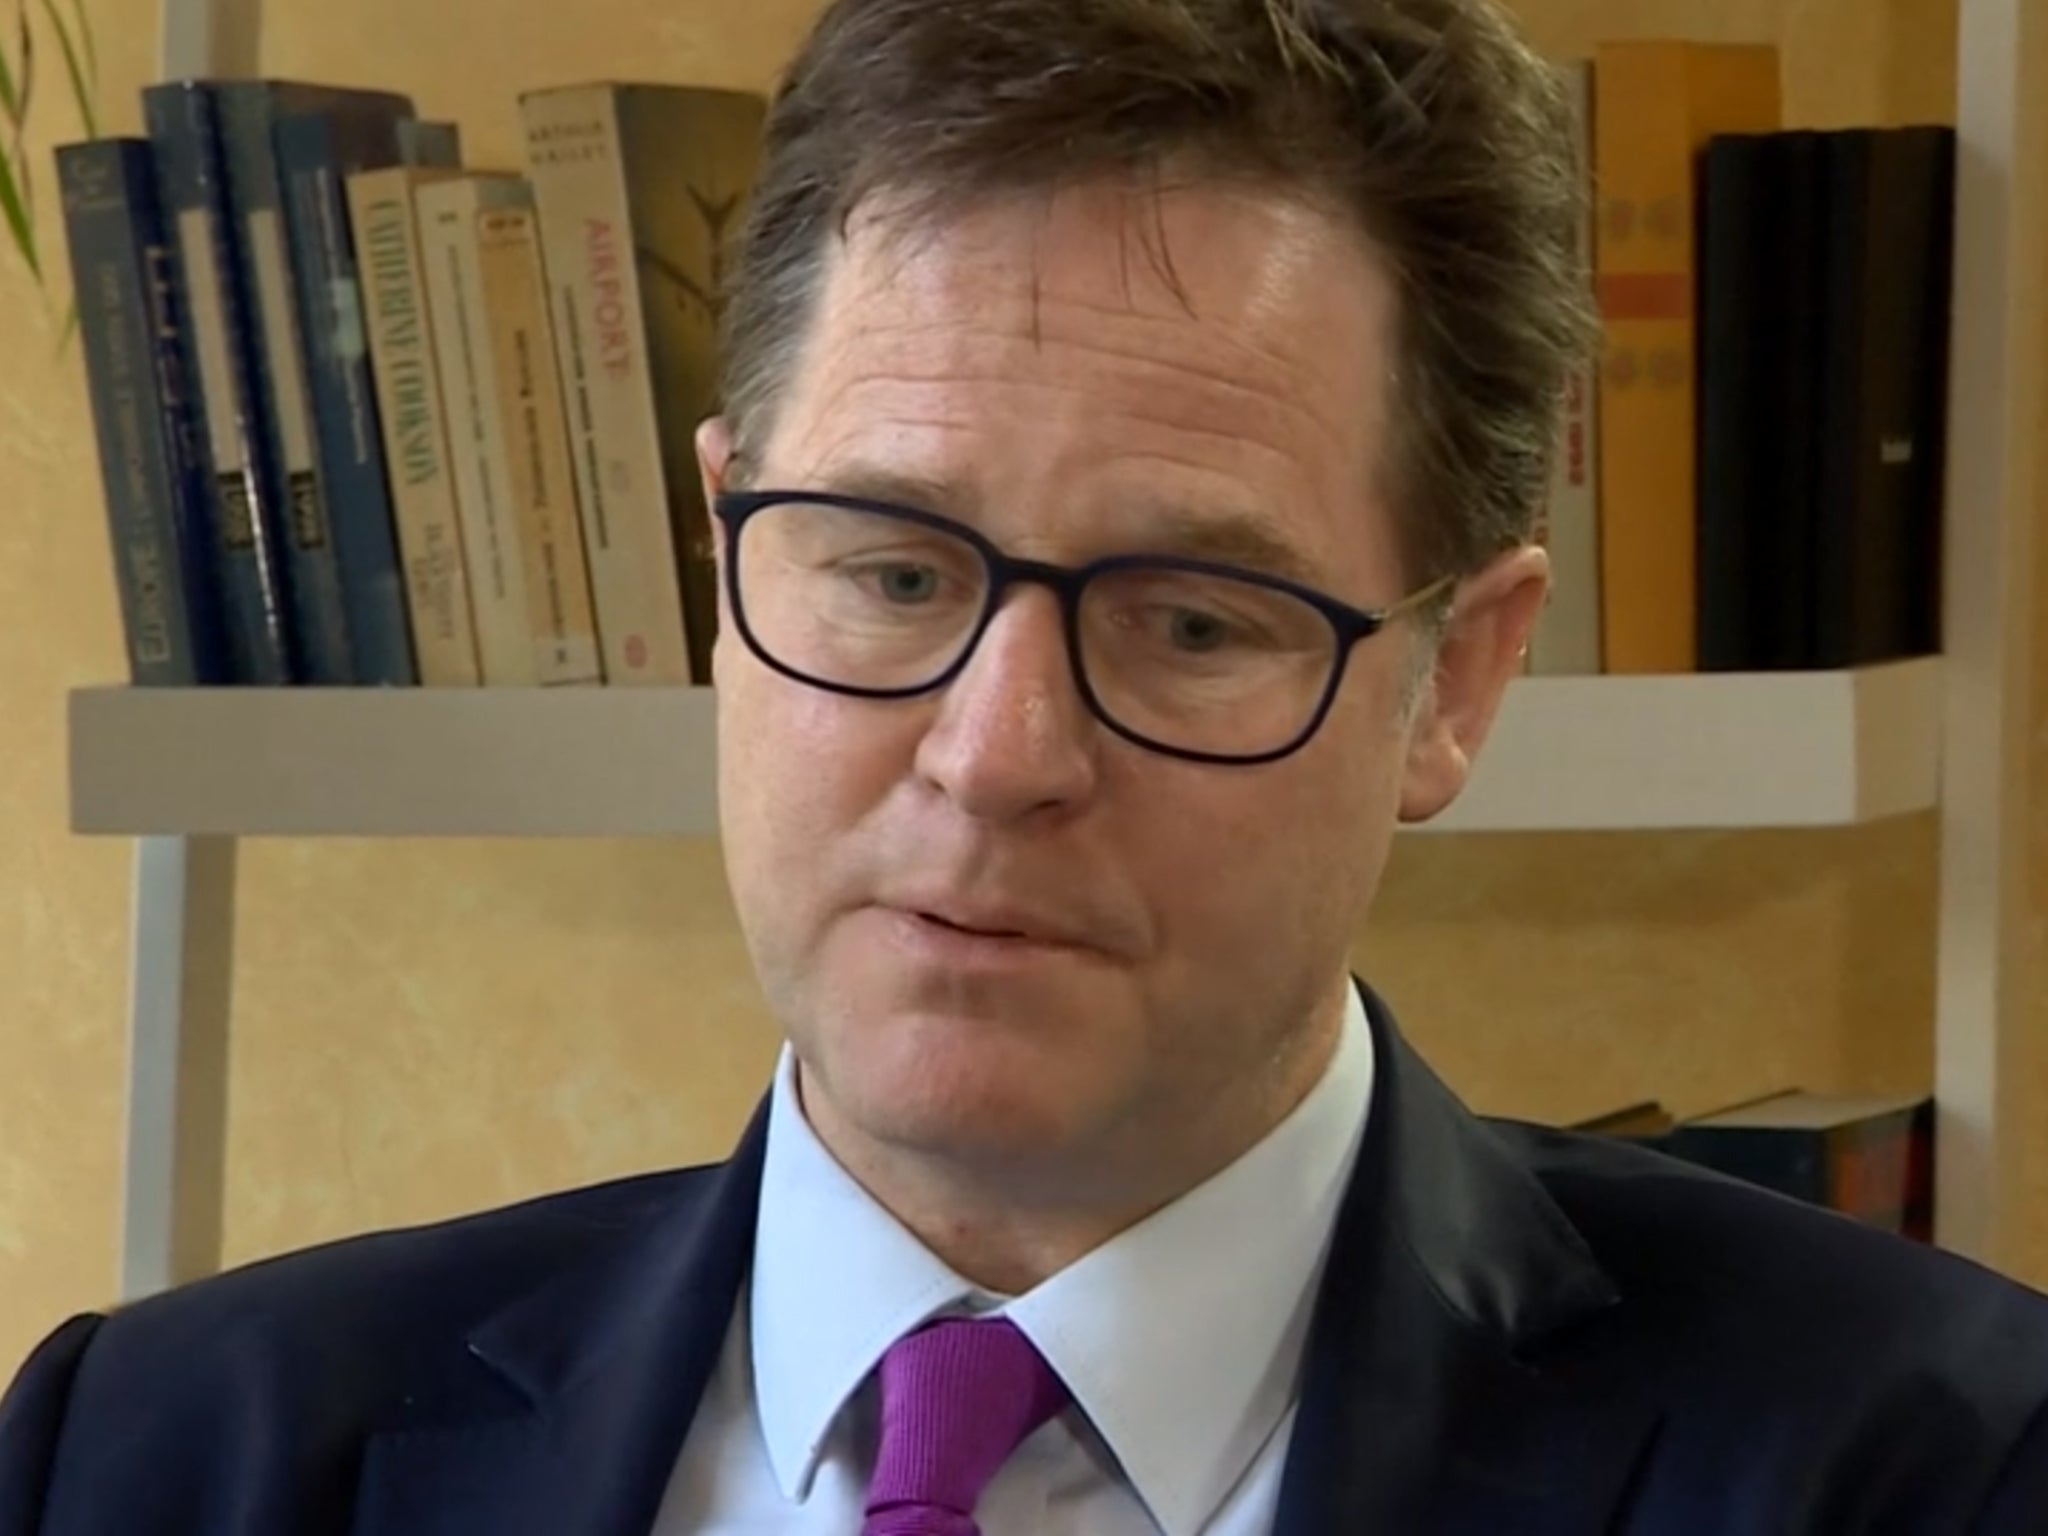 Former deputy PM Nick Clegg may have set the tone for Jo Swinson’s campaign